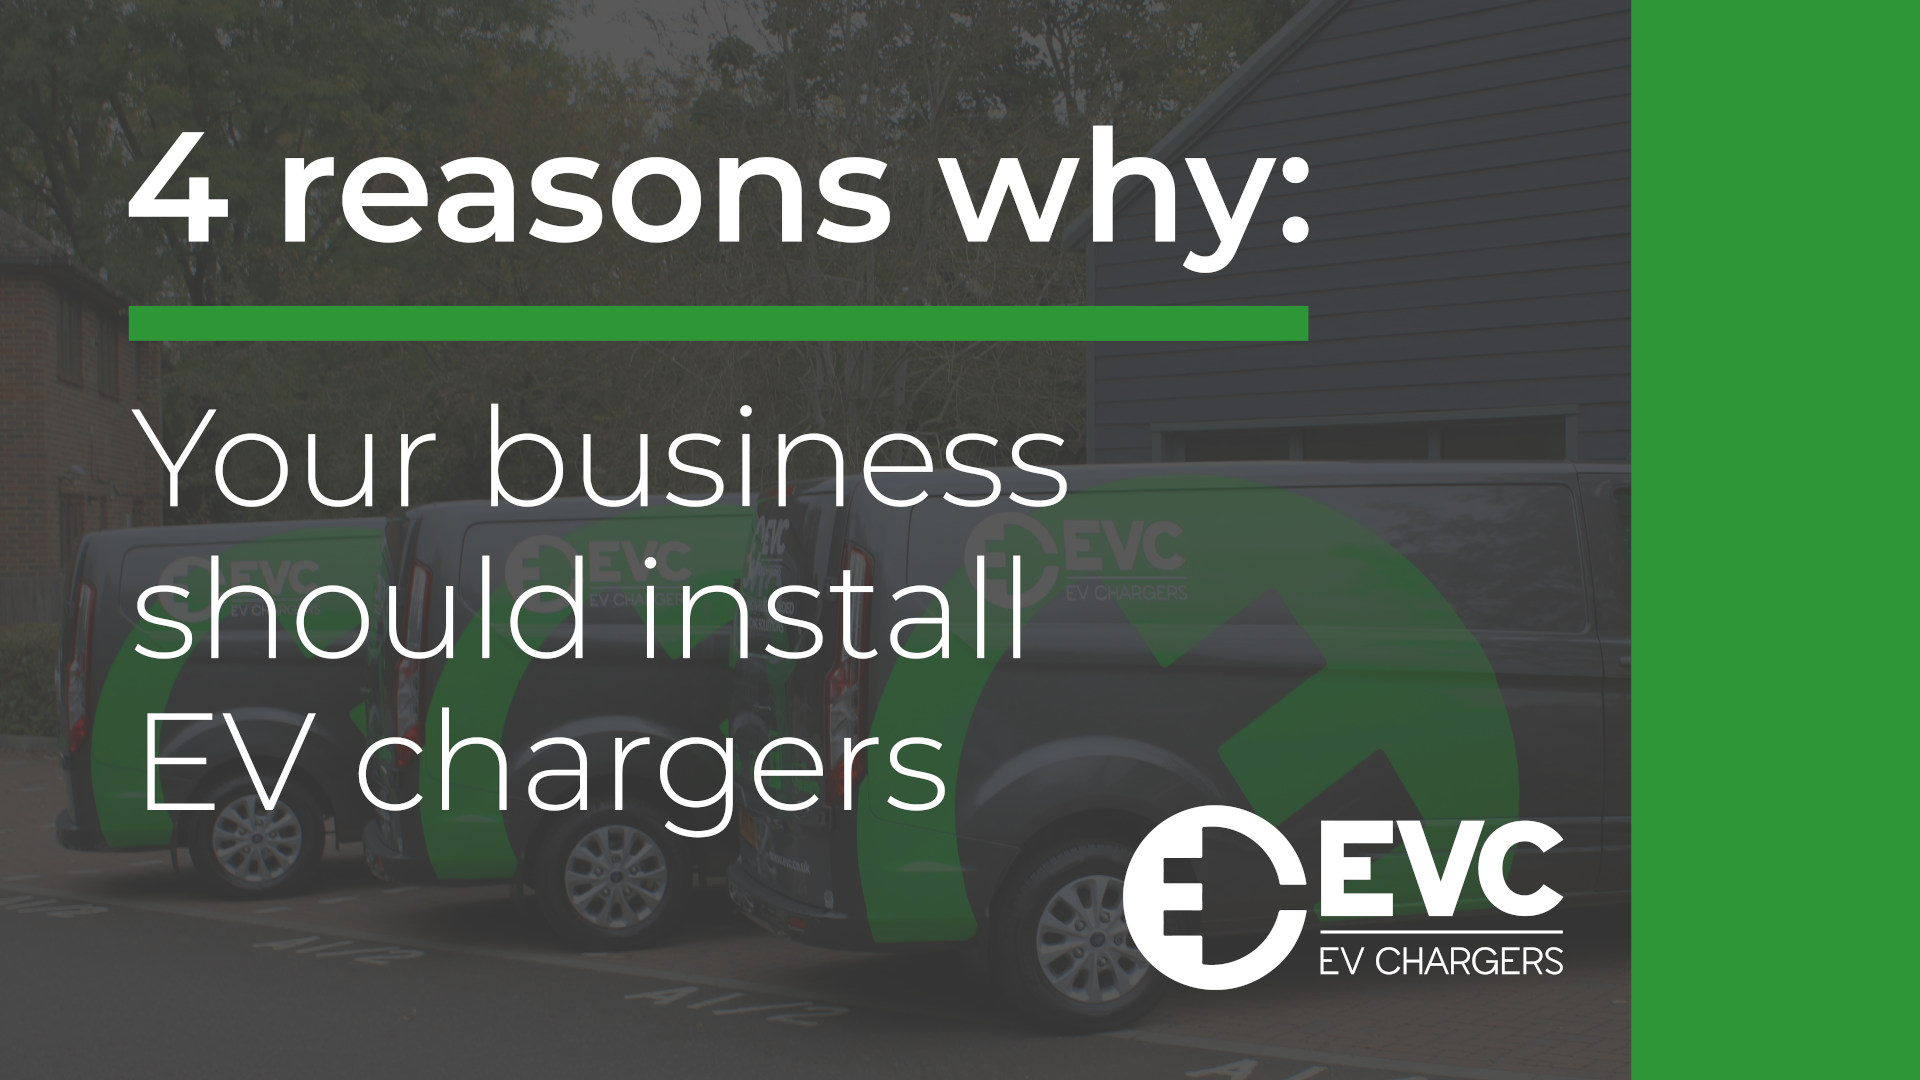 4 reasons why your business should install EV chargers